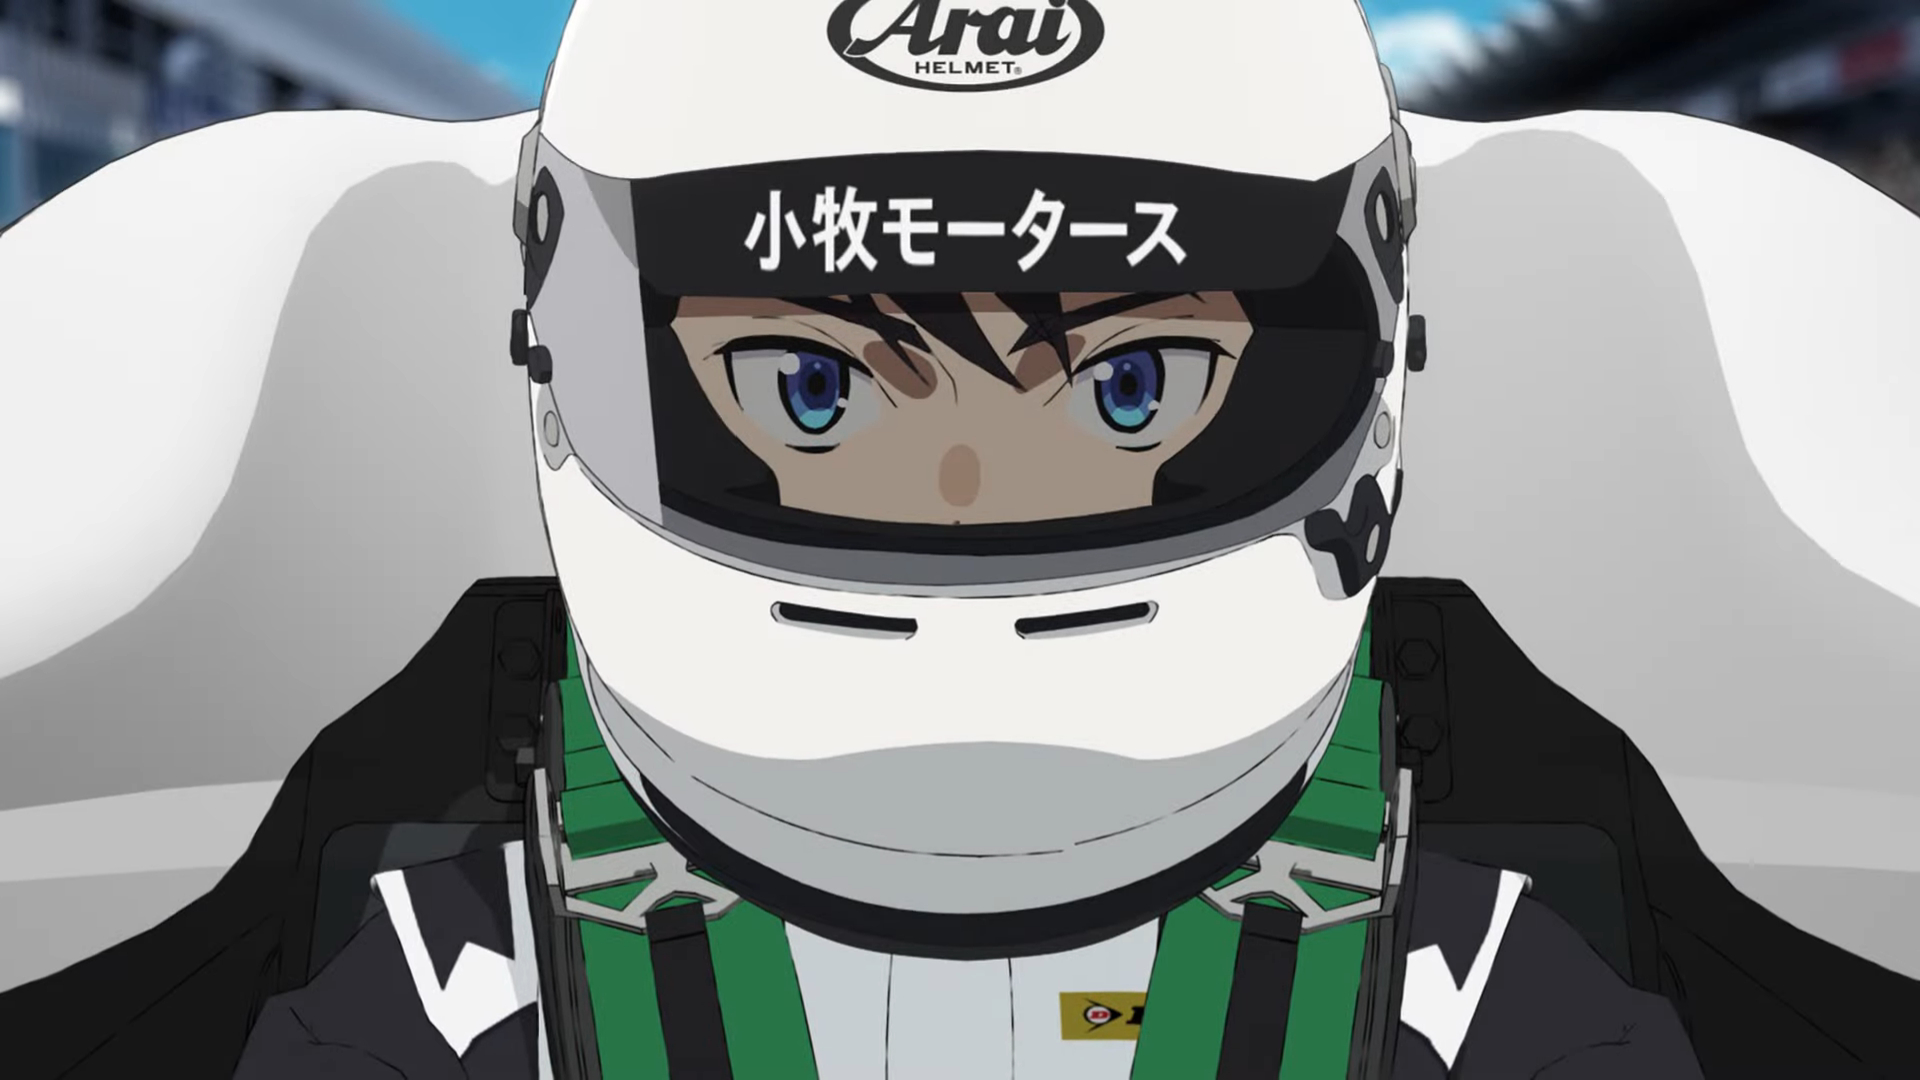 Gundam Studio Japanese Car Manufacturers Come Together for New Racing Anime